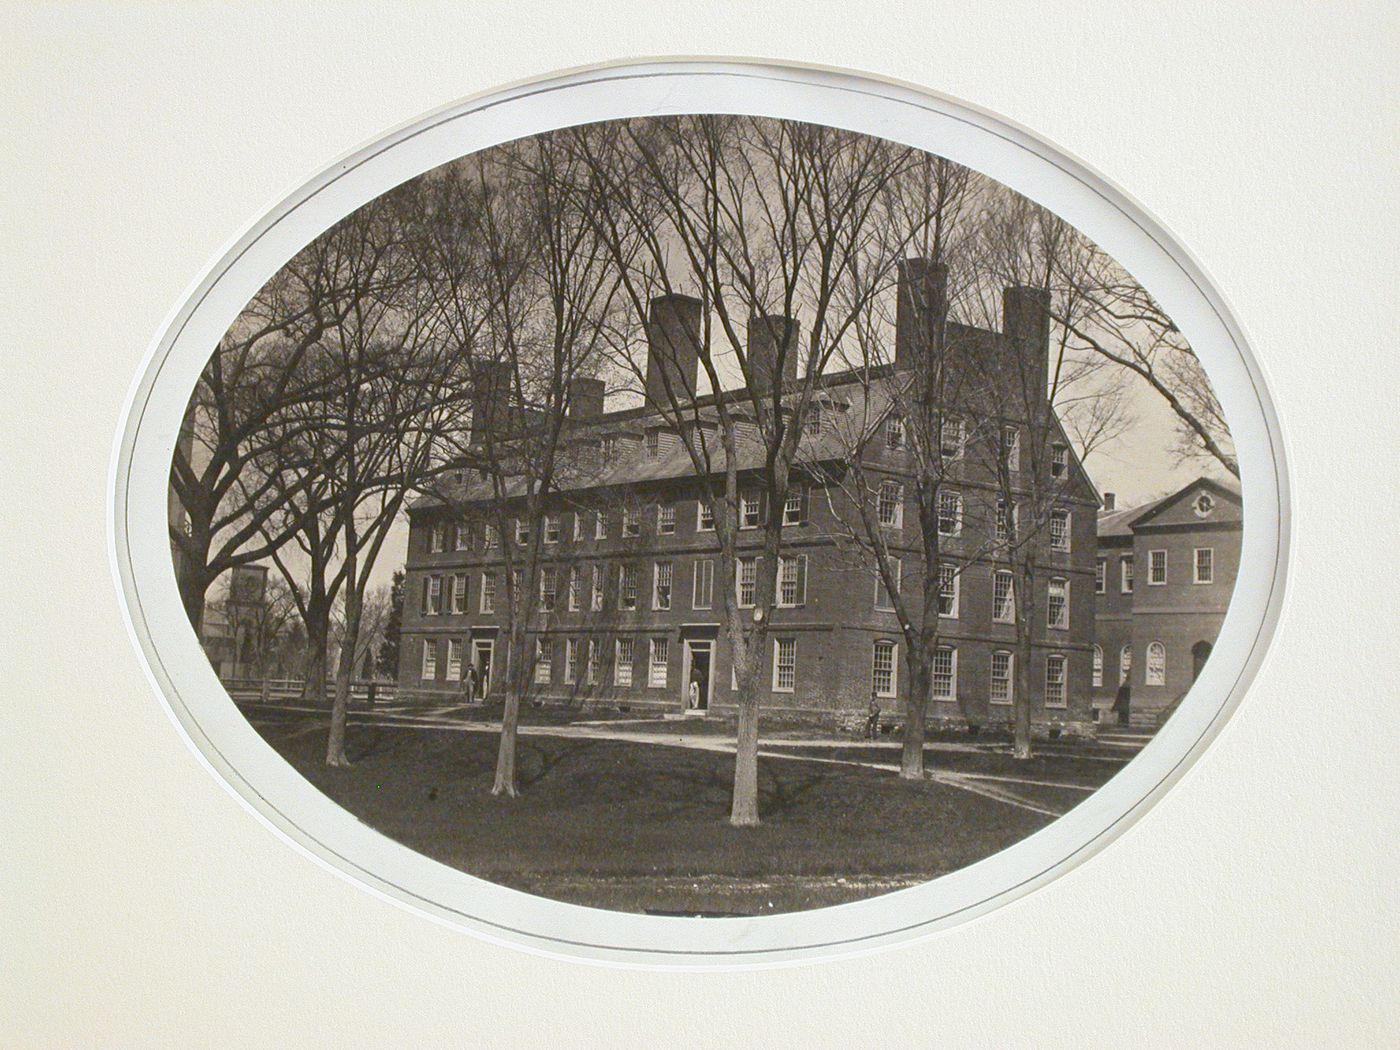 Exterior view of a college building with lawn and trees, figures in doorways, Harvard, Cambridge, Massachusetts